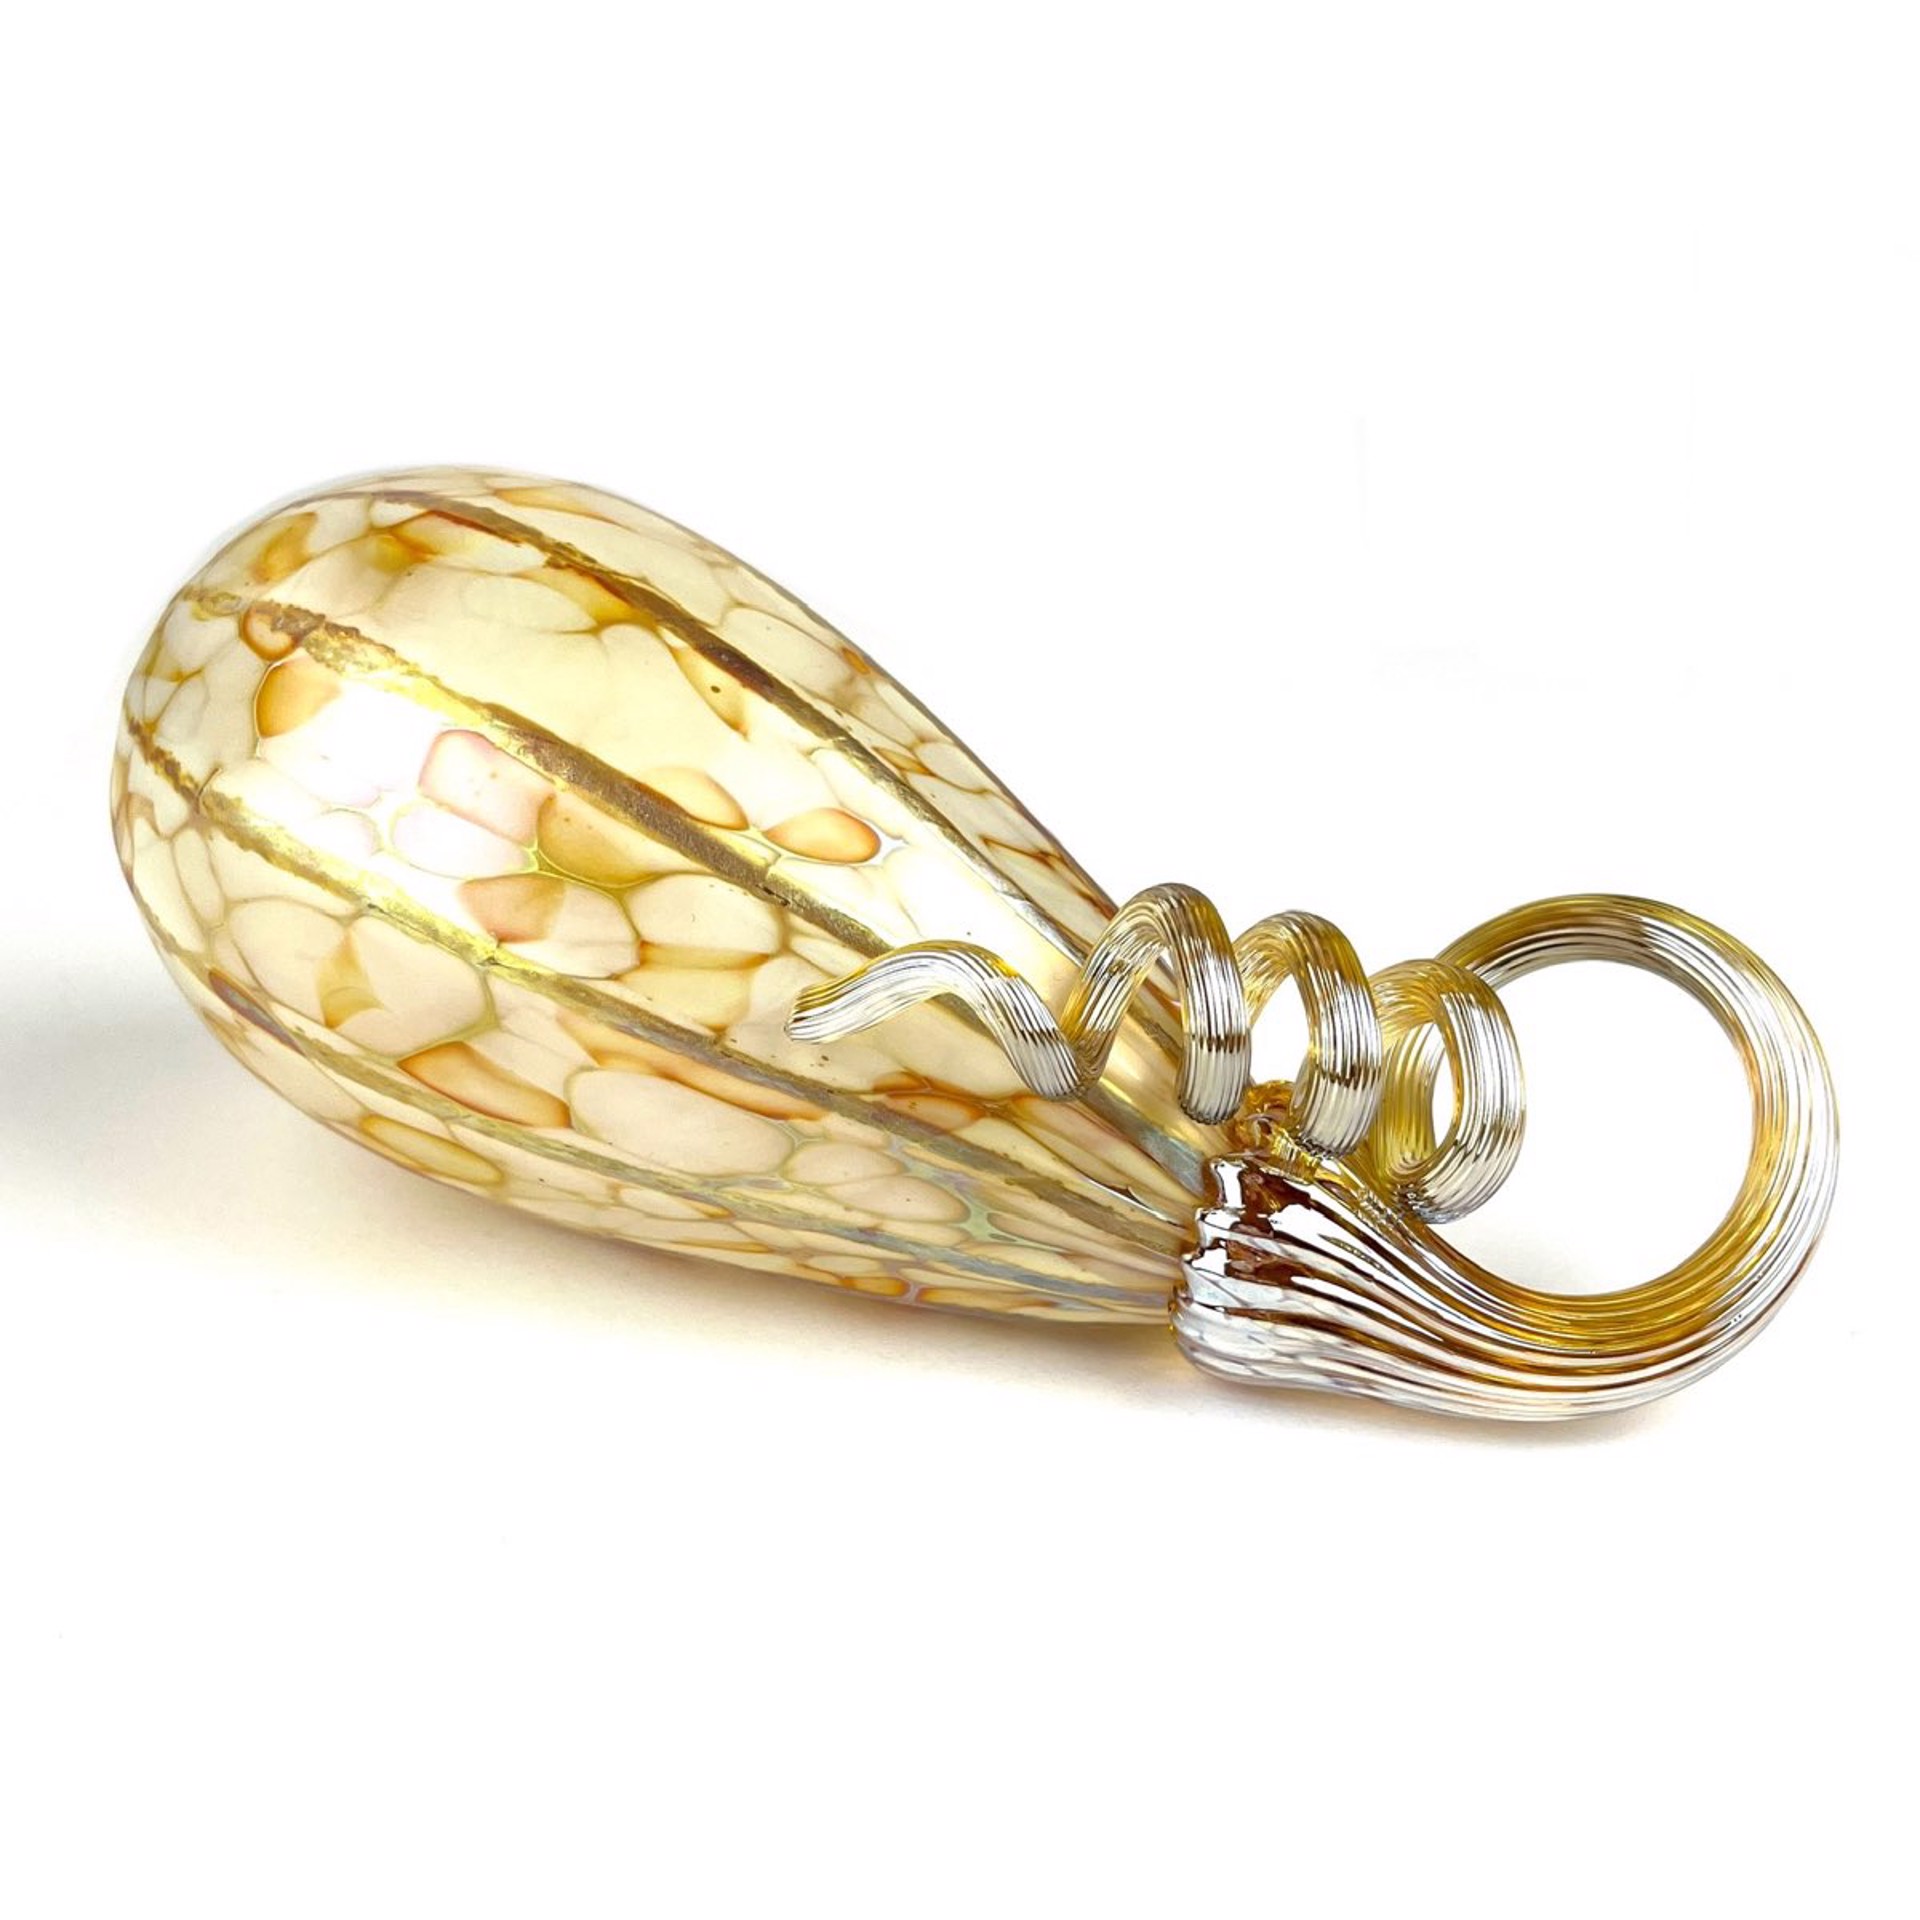 Petite Ivory Gourd by Furnace Glass